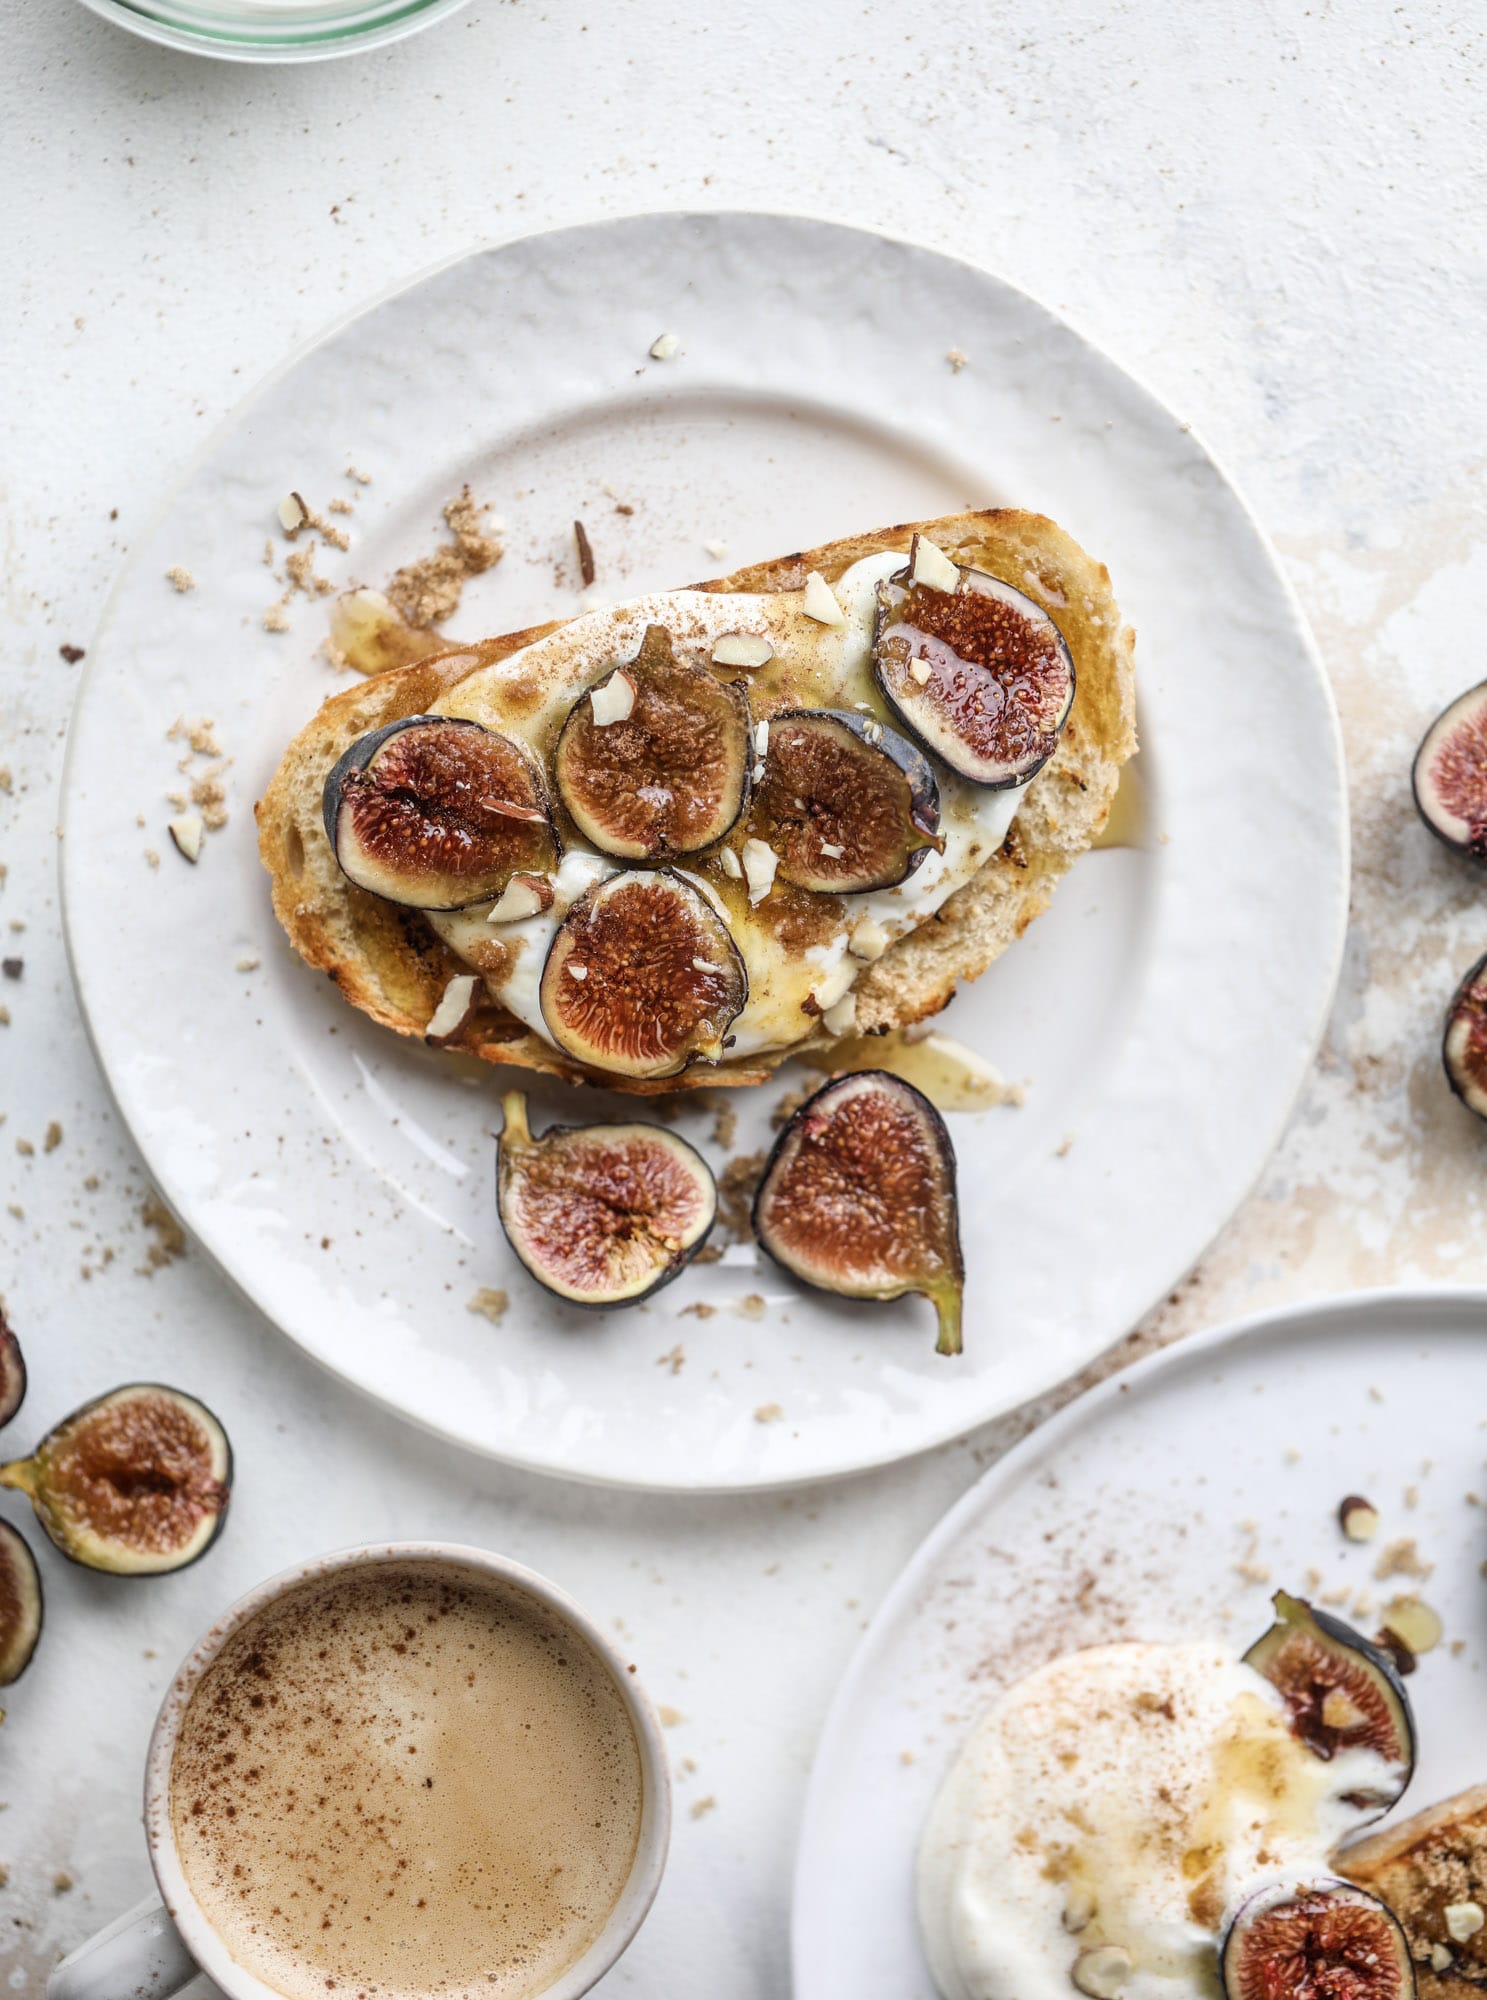 This cinnamon sugar toast is an absolutely dream! It's spread with a cinnamon brown sugar butter, grilled to perfection and served with creamy whipped ricotta cheese, fresh figs, honey, cinnamon and sliced almonds. I howsweeteats.com #cinnamon #sugar #toast #ricotta #figs #breakfast